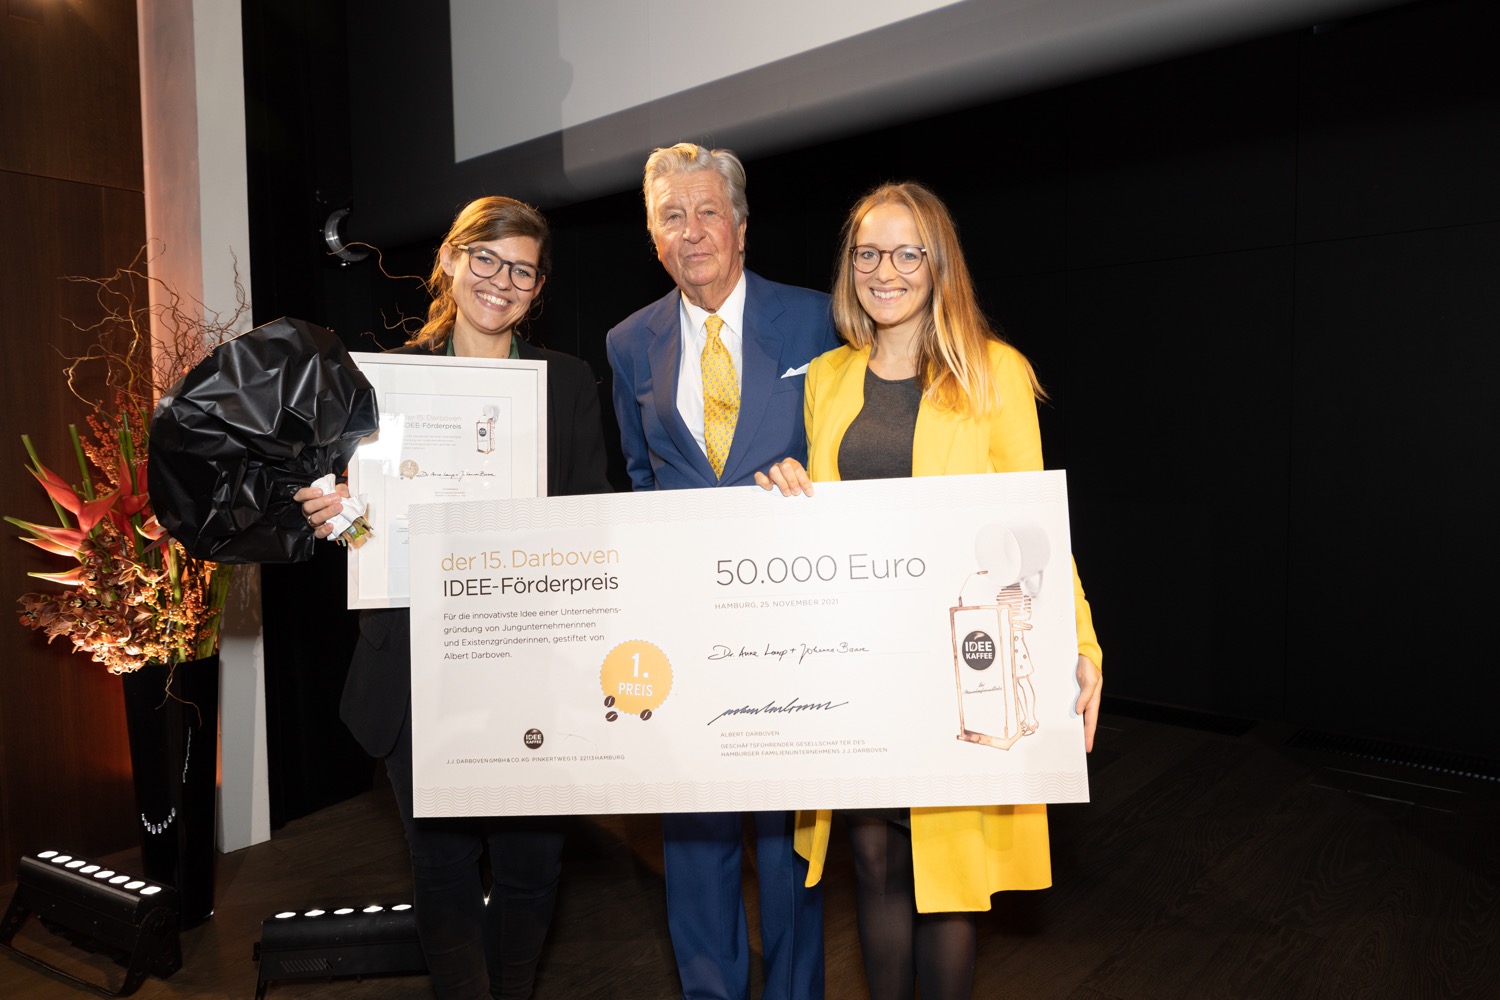 IDEE Sponsorship Prize - Mr. Darboven and founders